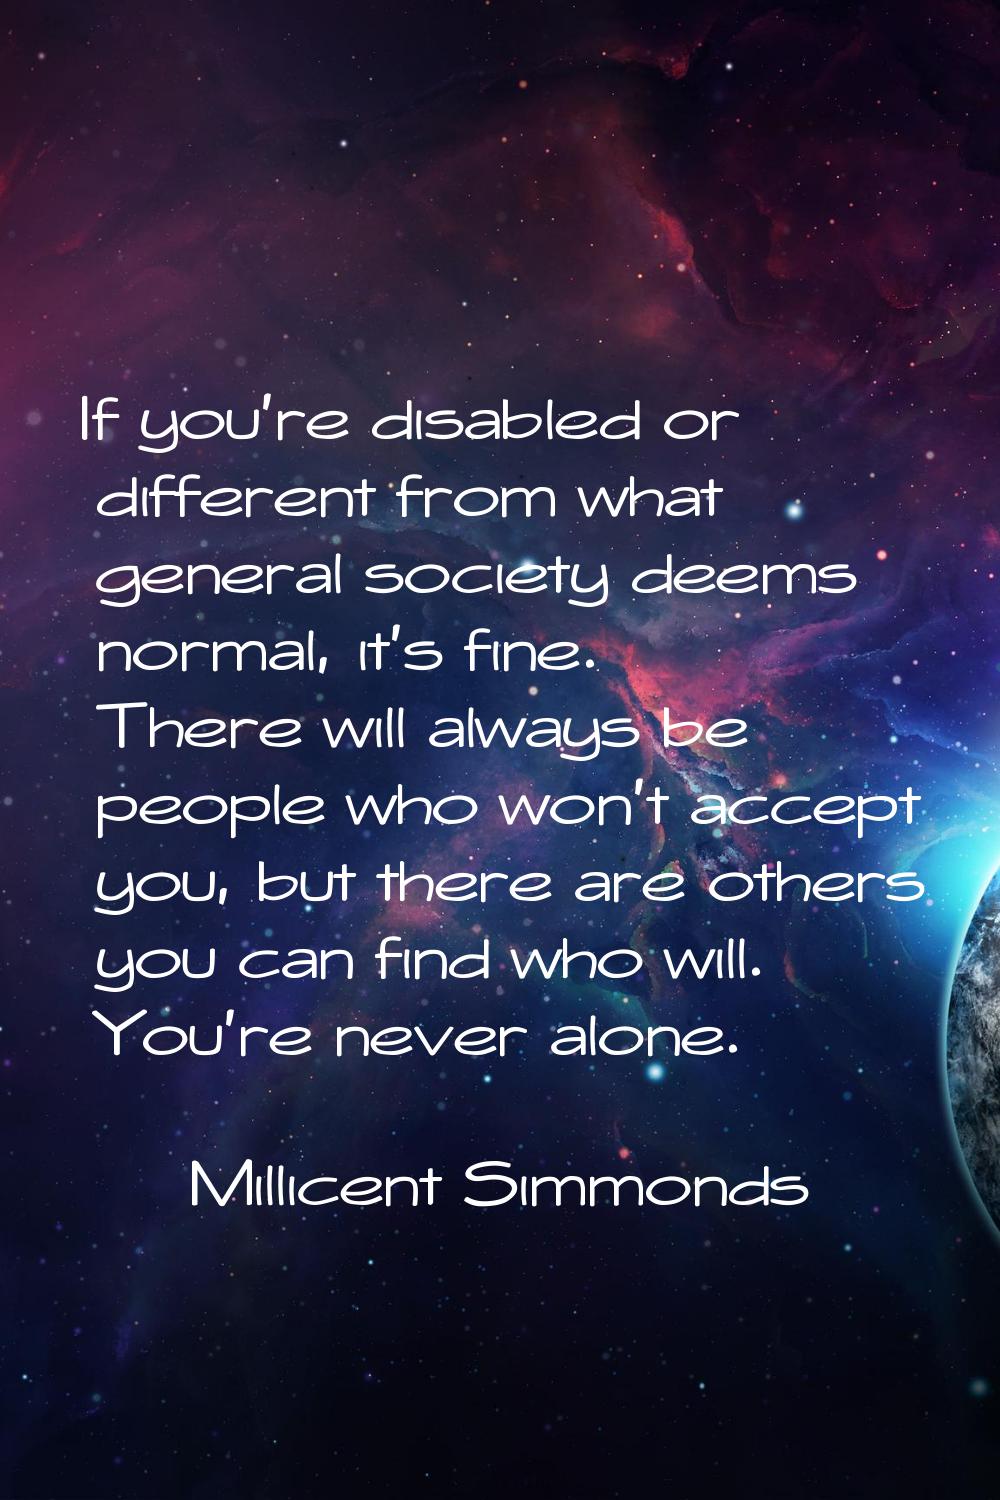 If you're disabled or different from what general society deems normal, it's fine. There will alway